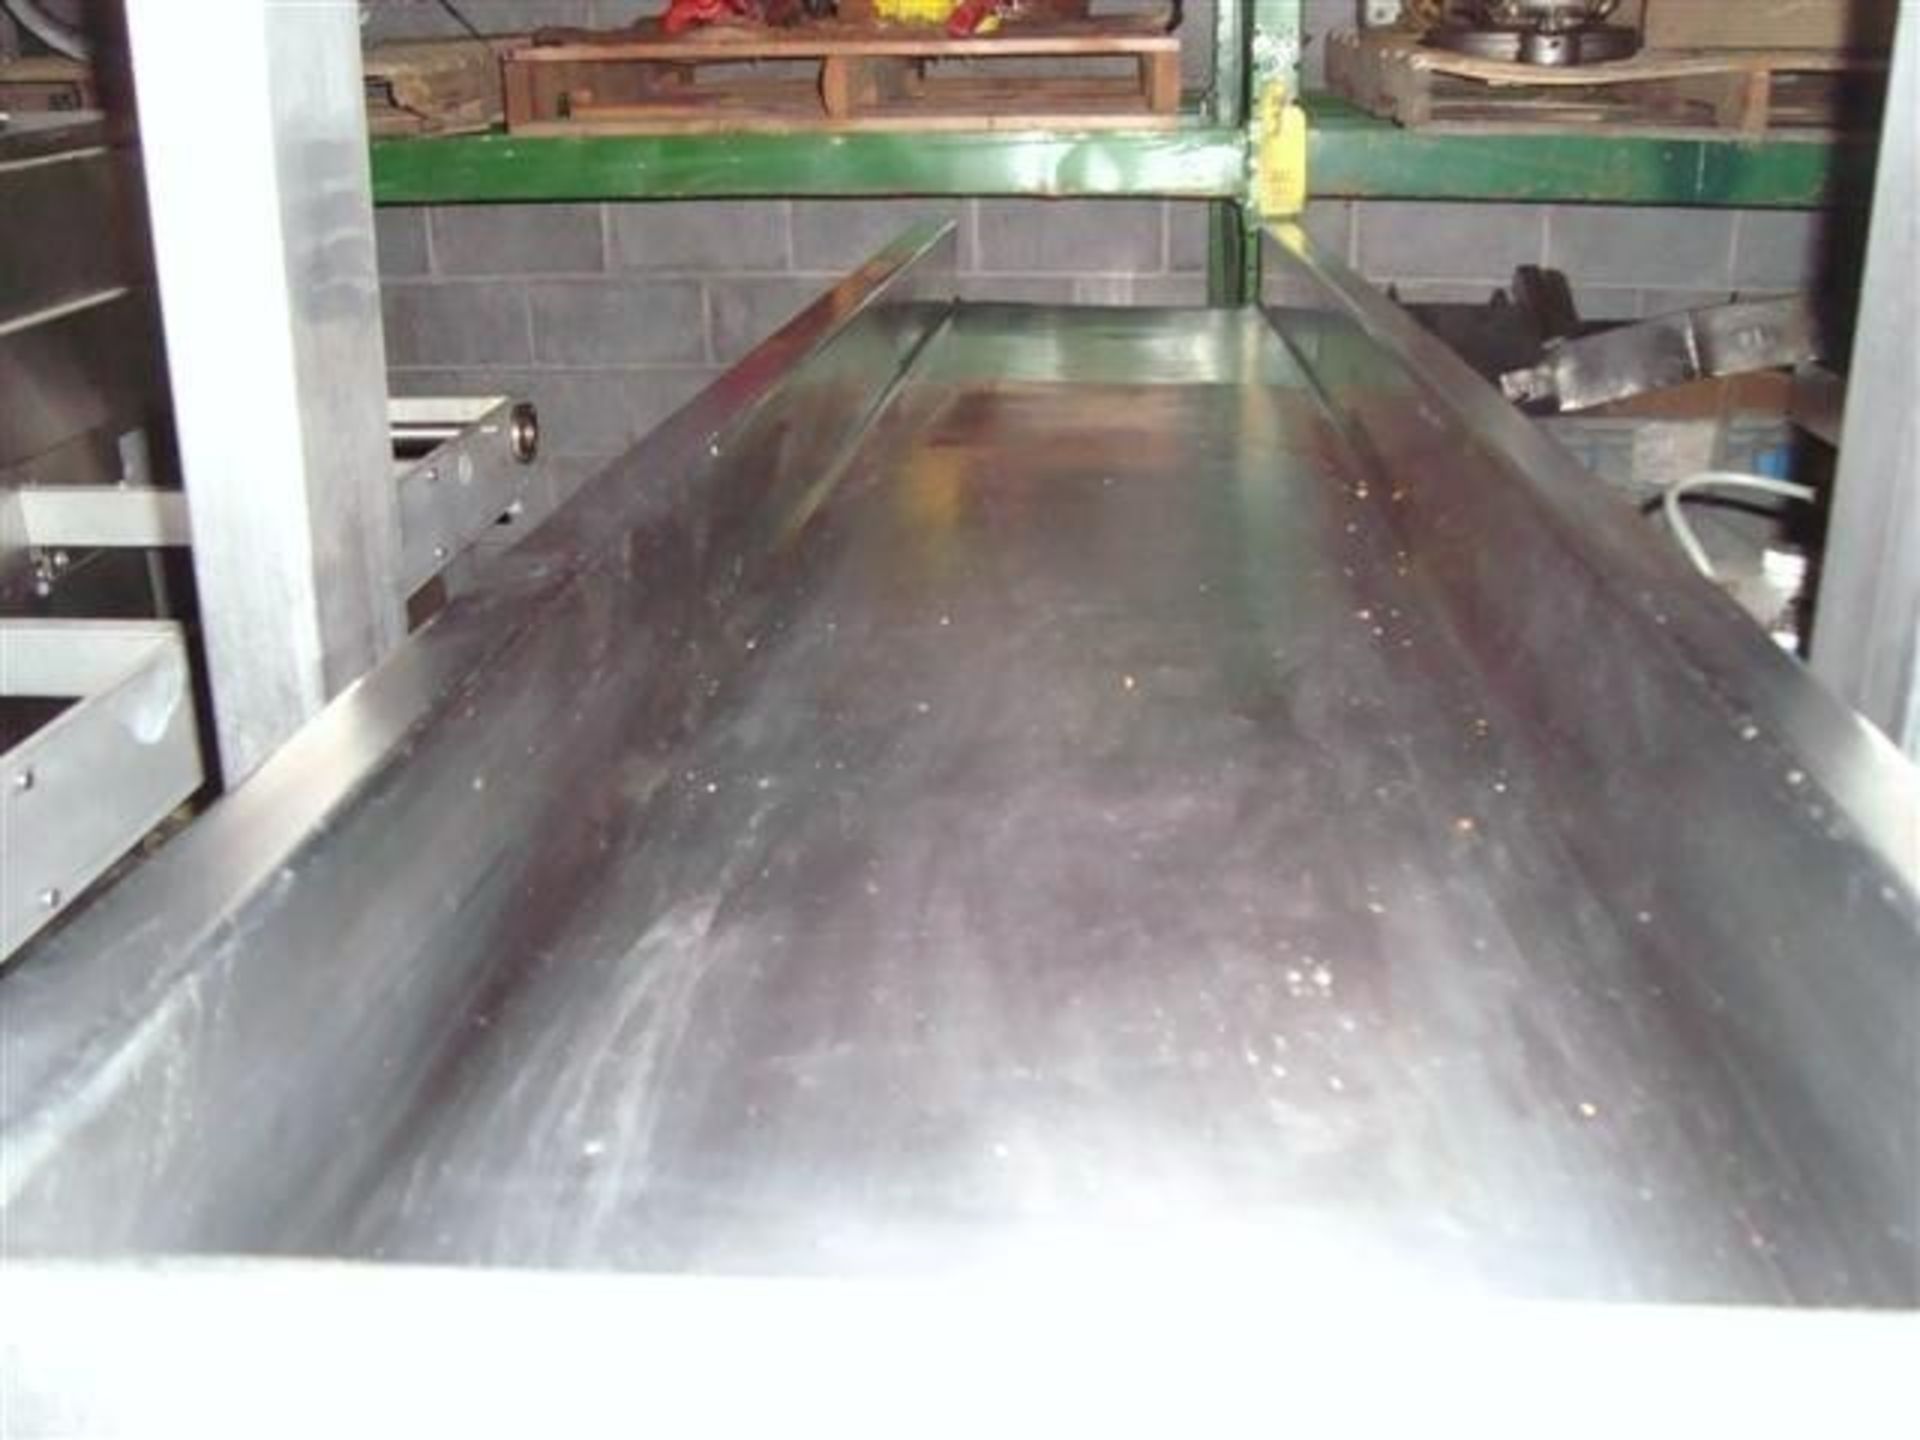 Smalley Vibratory S/S Feeder Conveyor, Model 1-V-015-007-SS-USDA, S/N 9108, Aprox.- 15" W x 84" L - Image 4 of 6